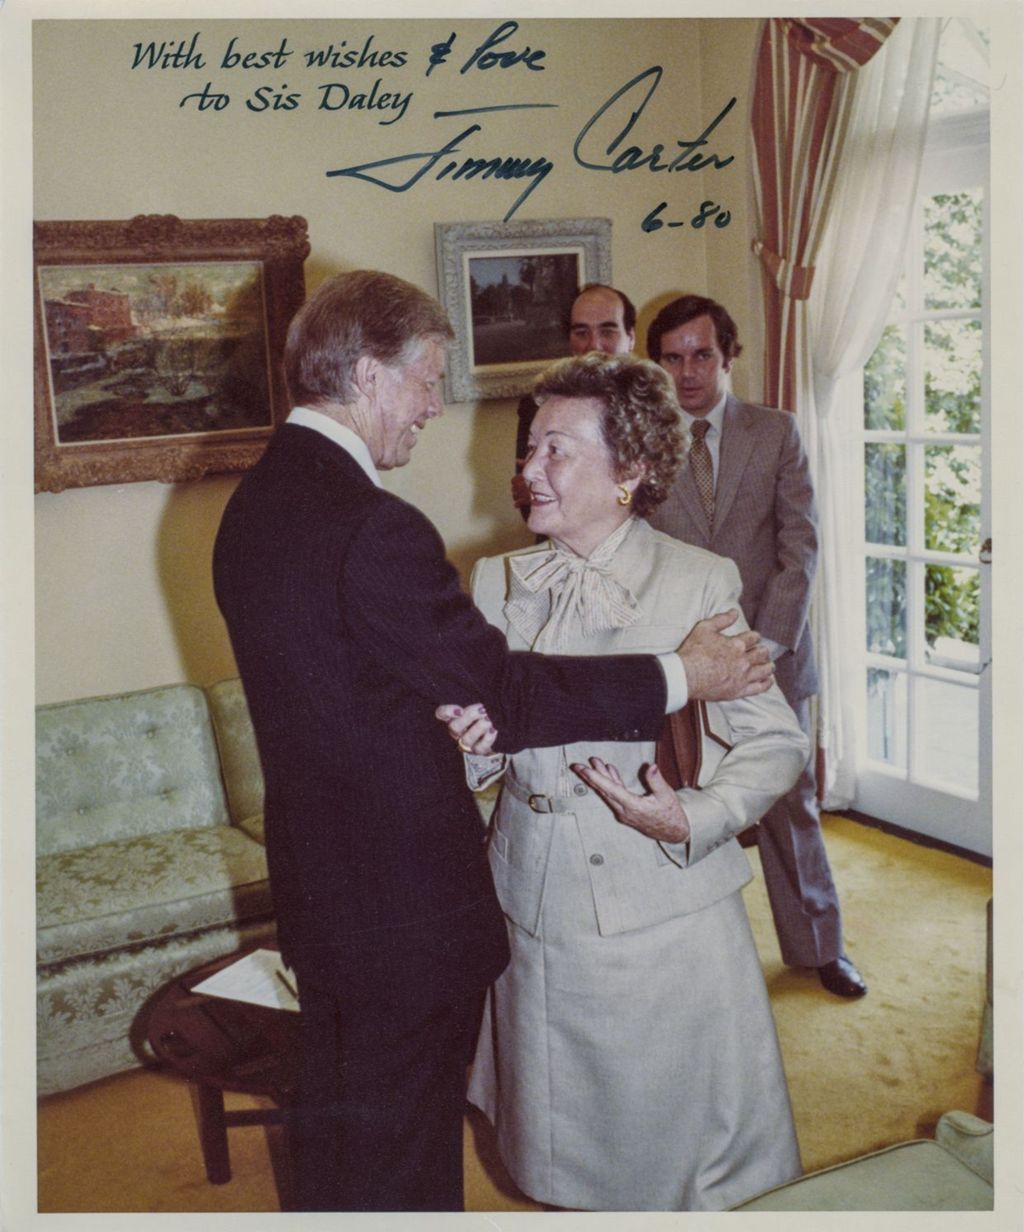 Jimmy Carter with Eleanor Daley at the White House